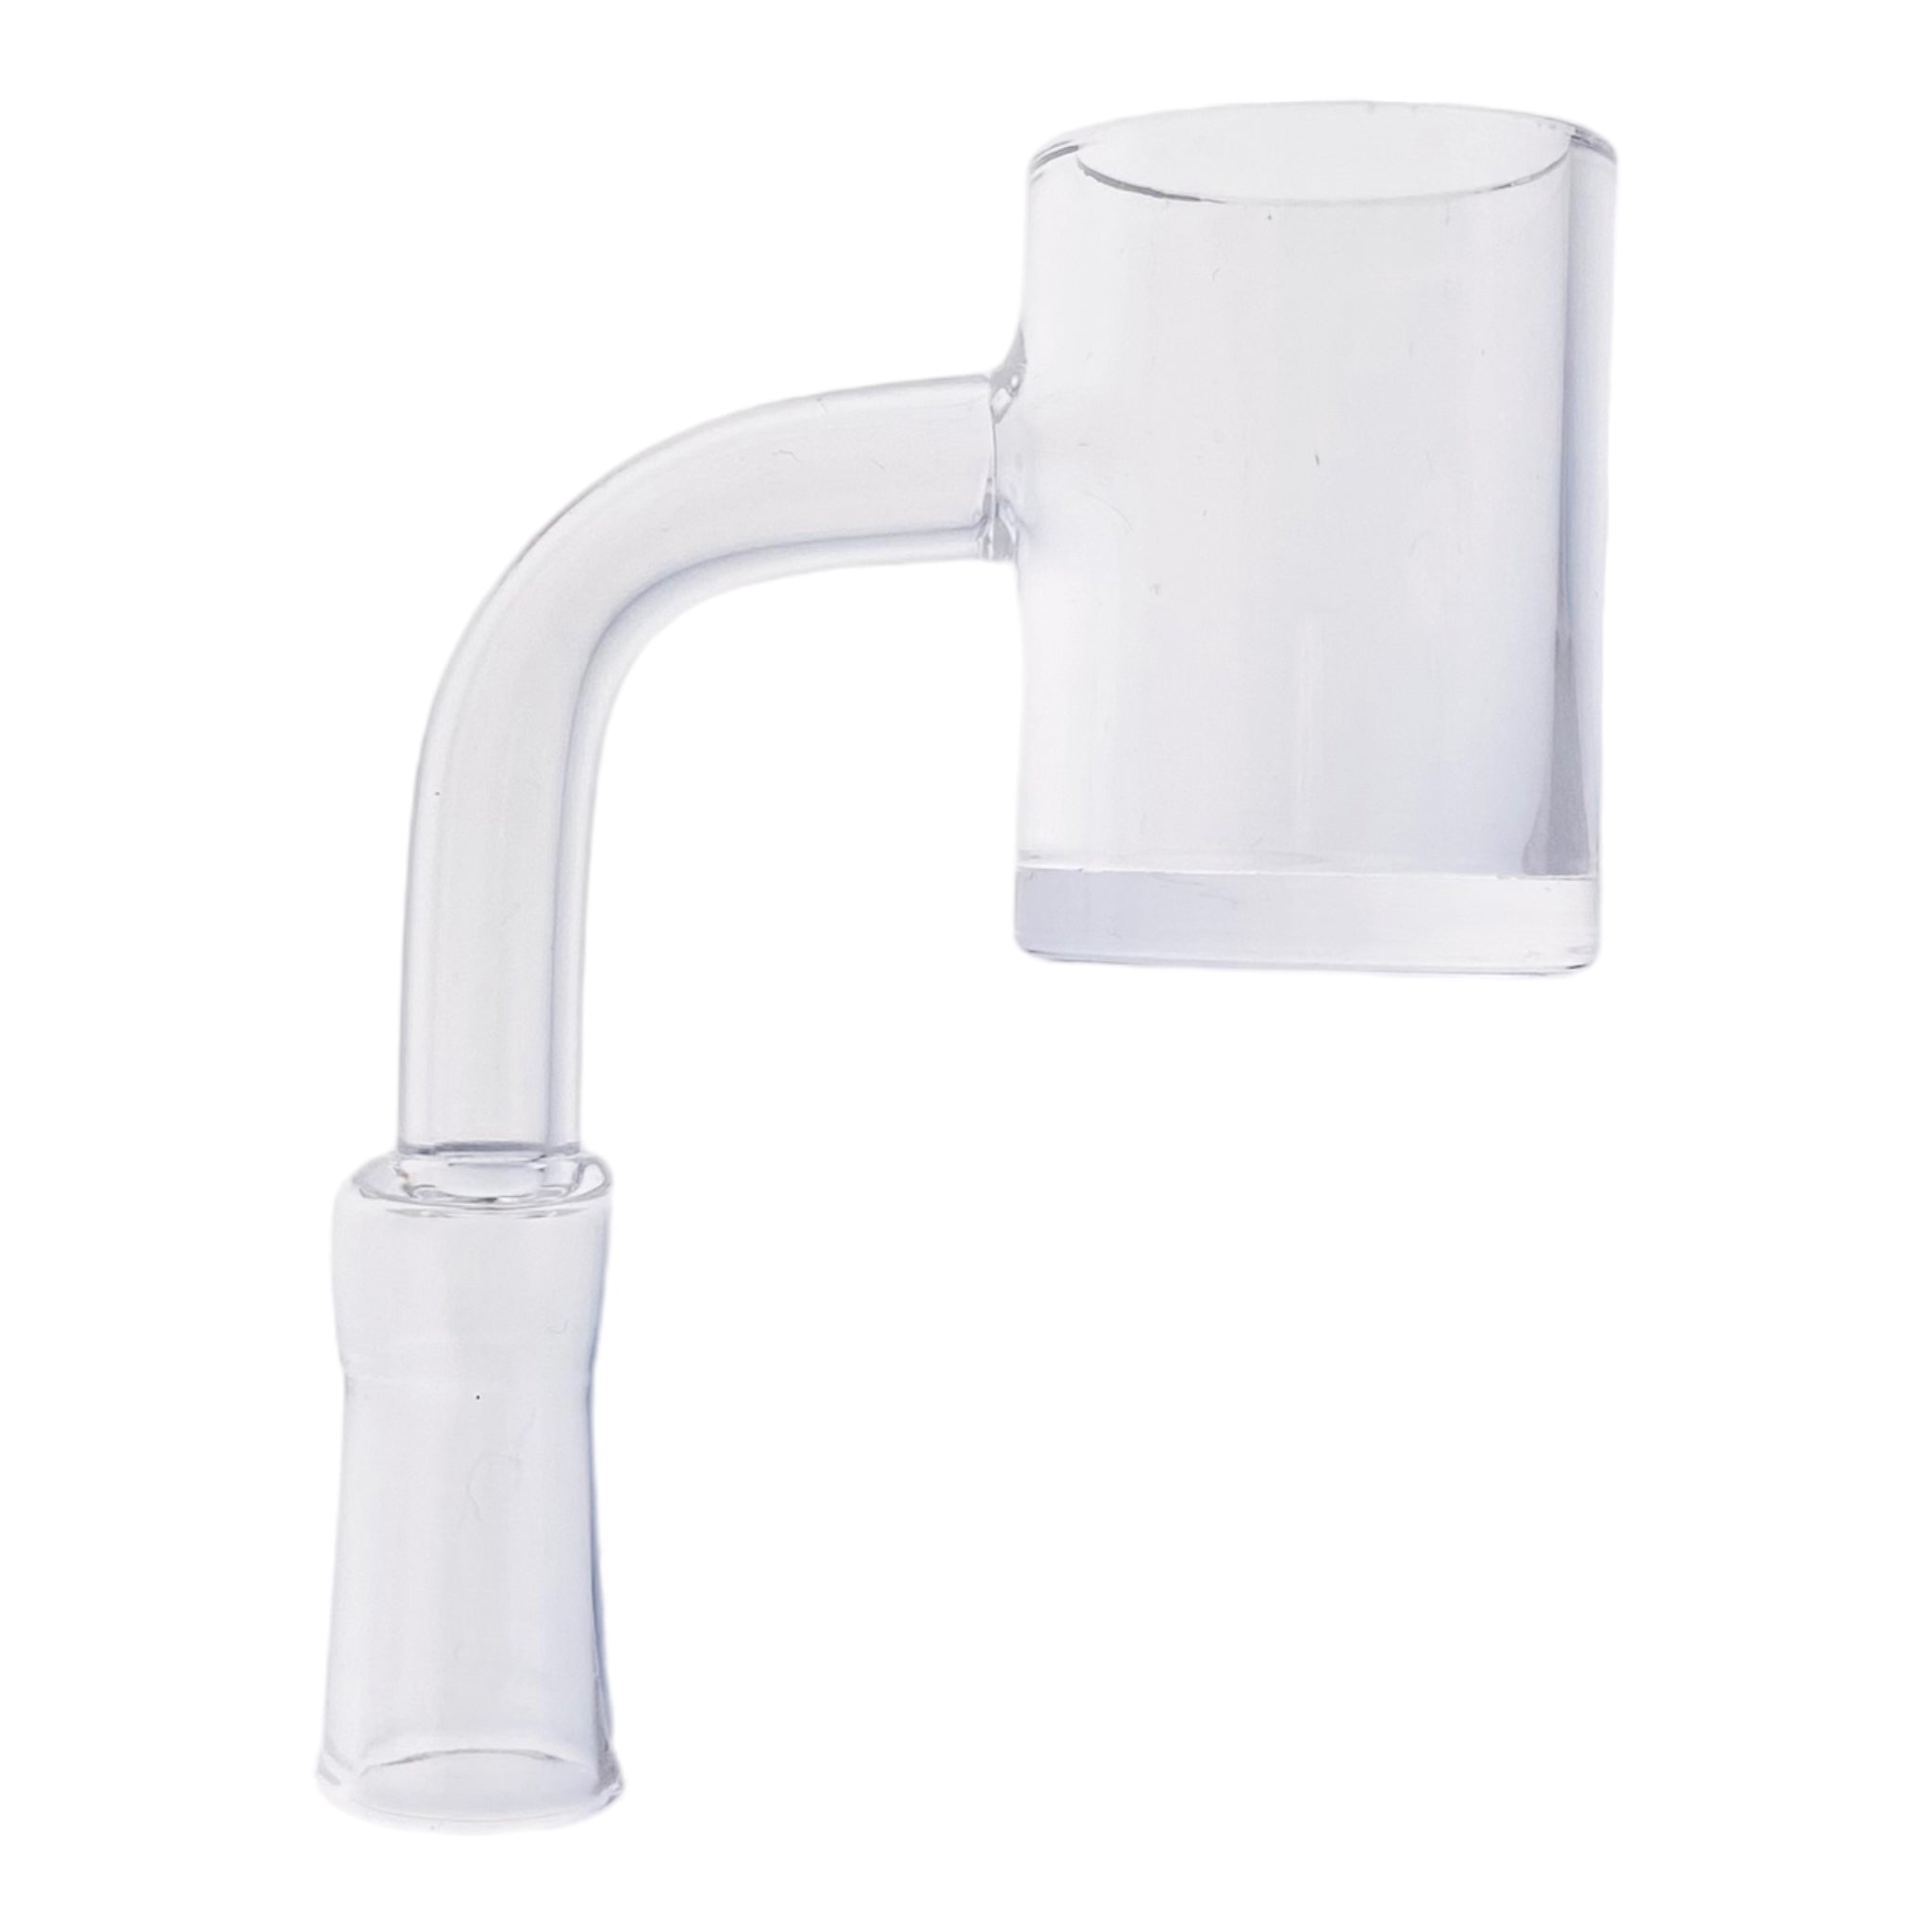 10mm Quartz Banger With 90 Degree Female Fitting And 25mm Wide Bucket And Thick Bottom